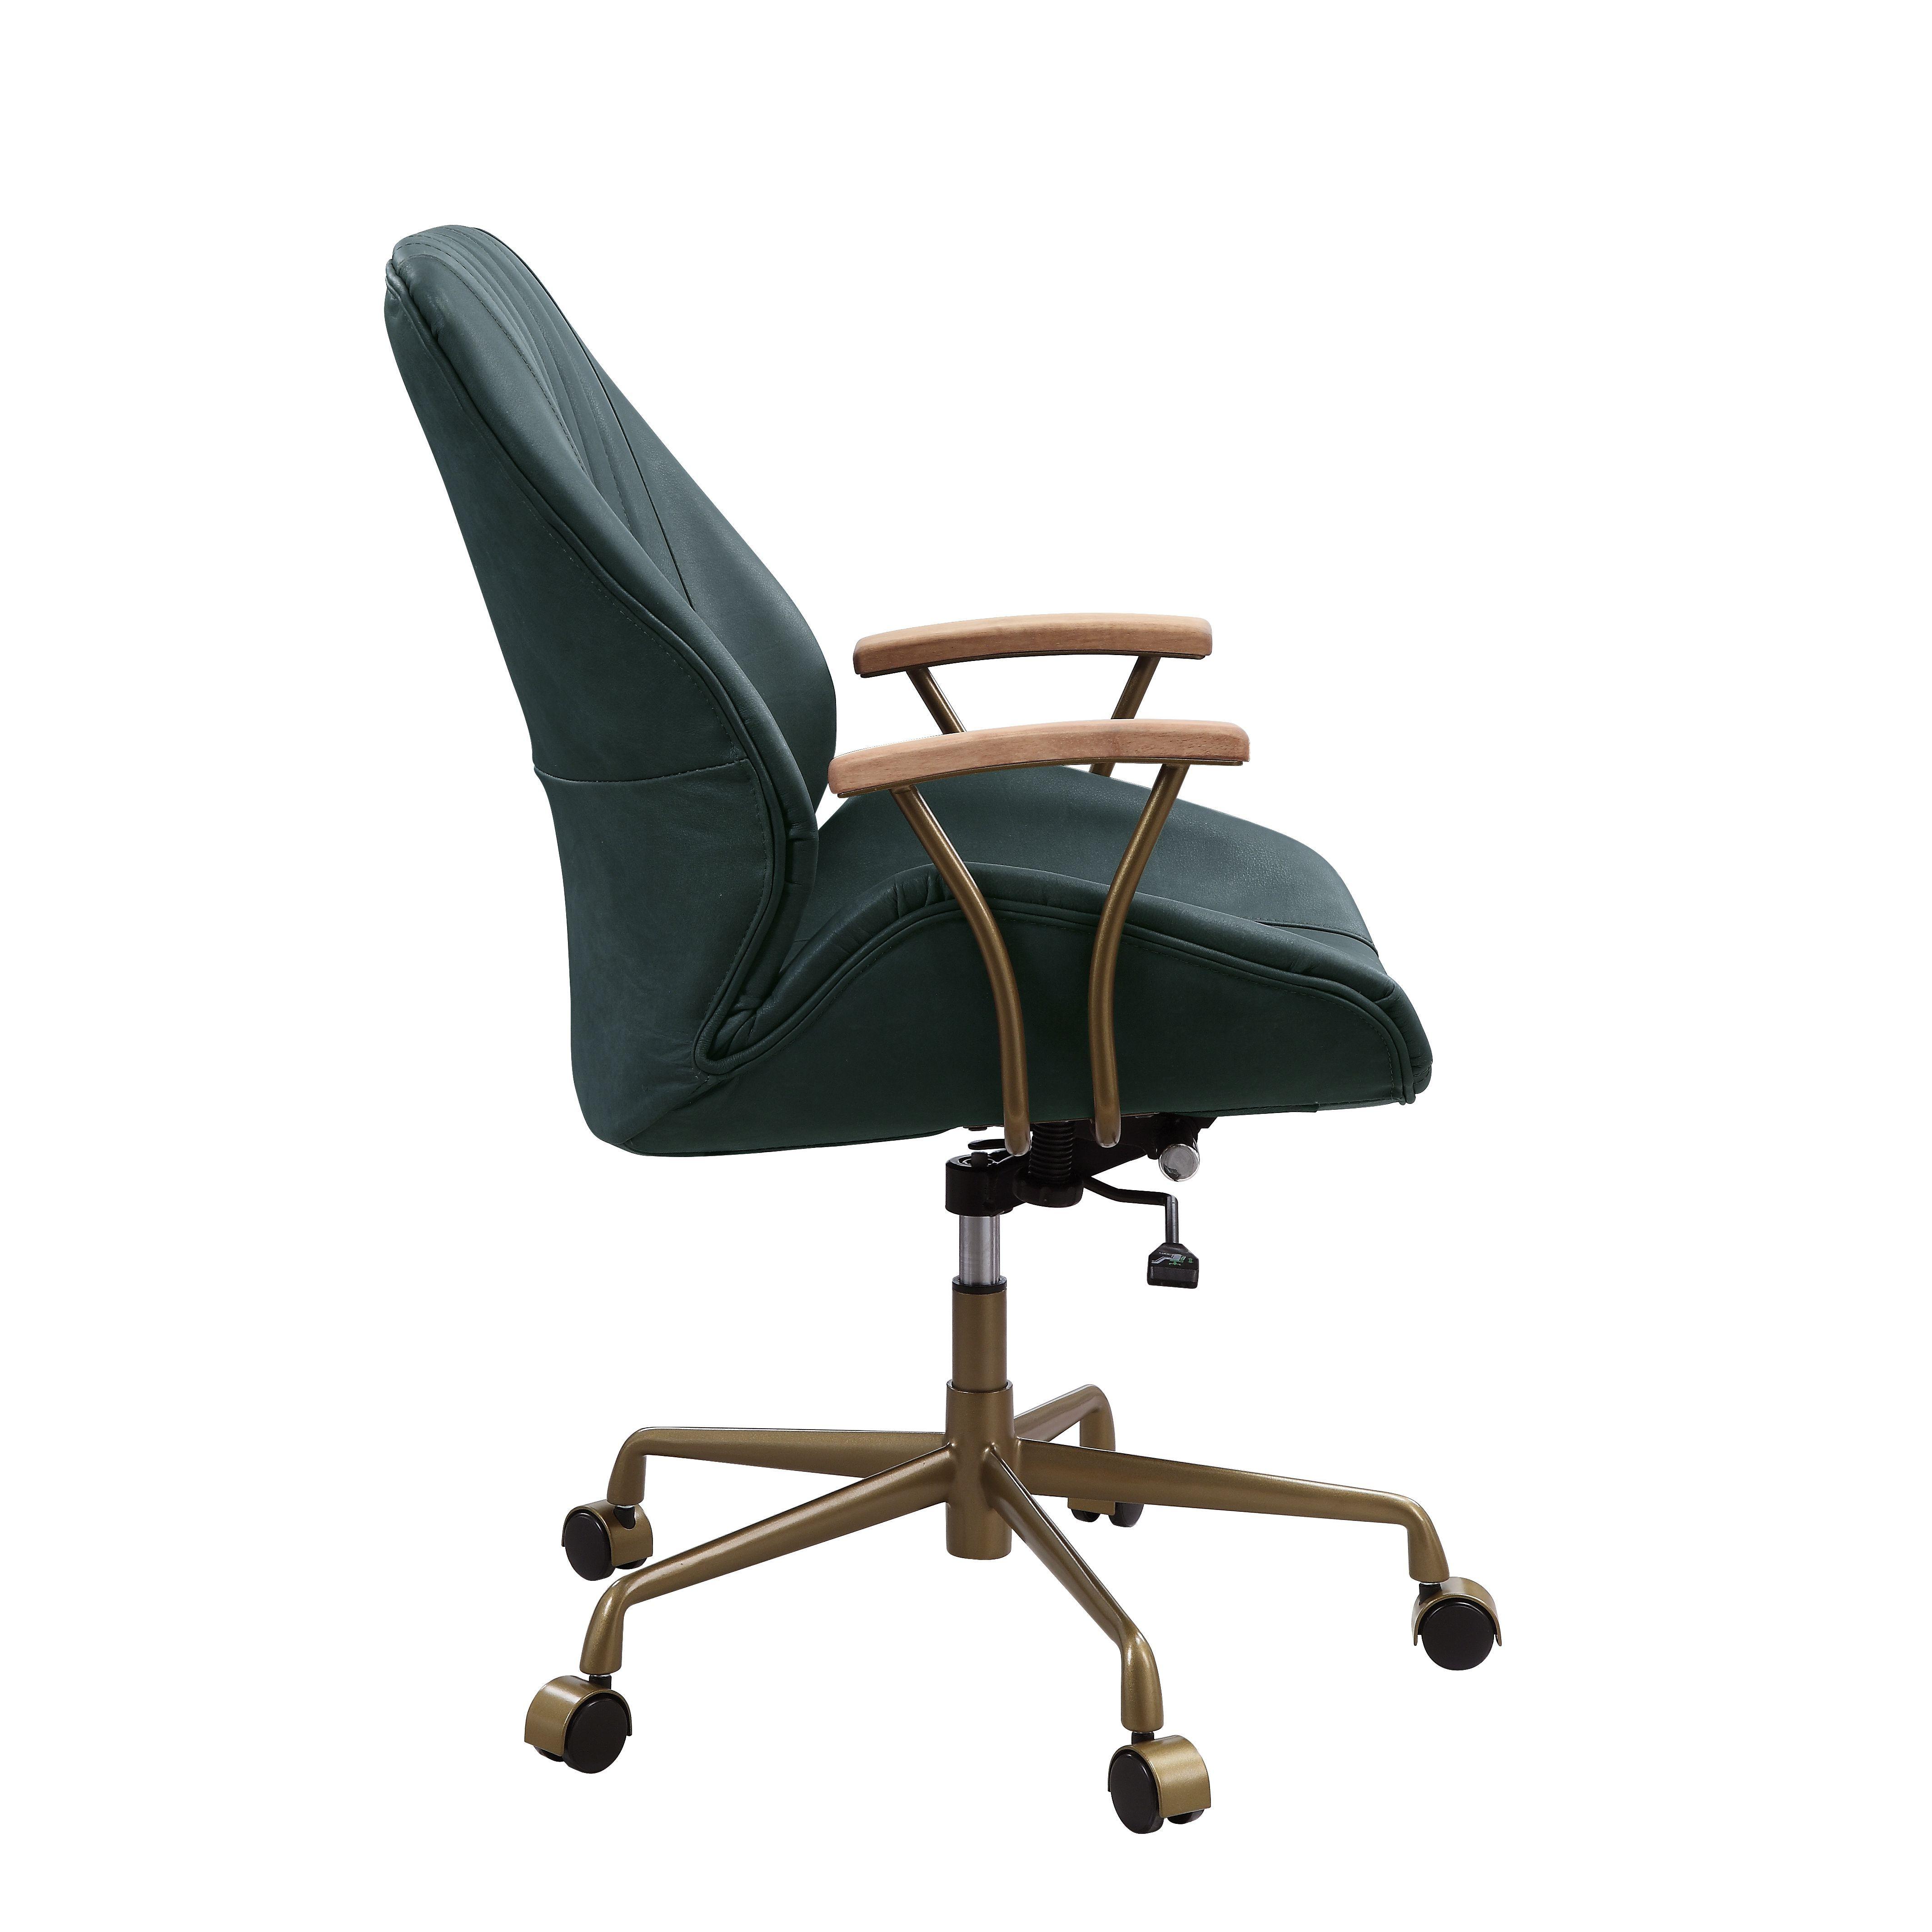 

    
Argrio Home Office Chair
